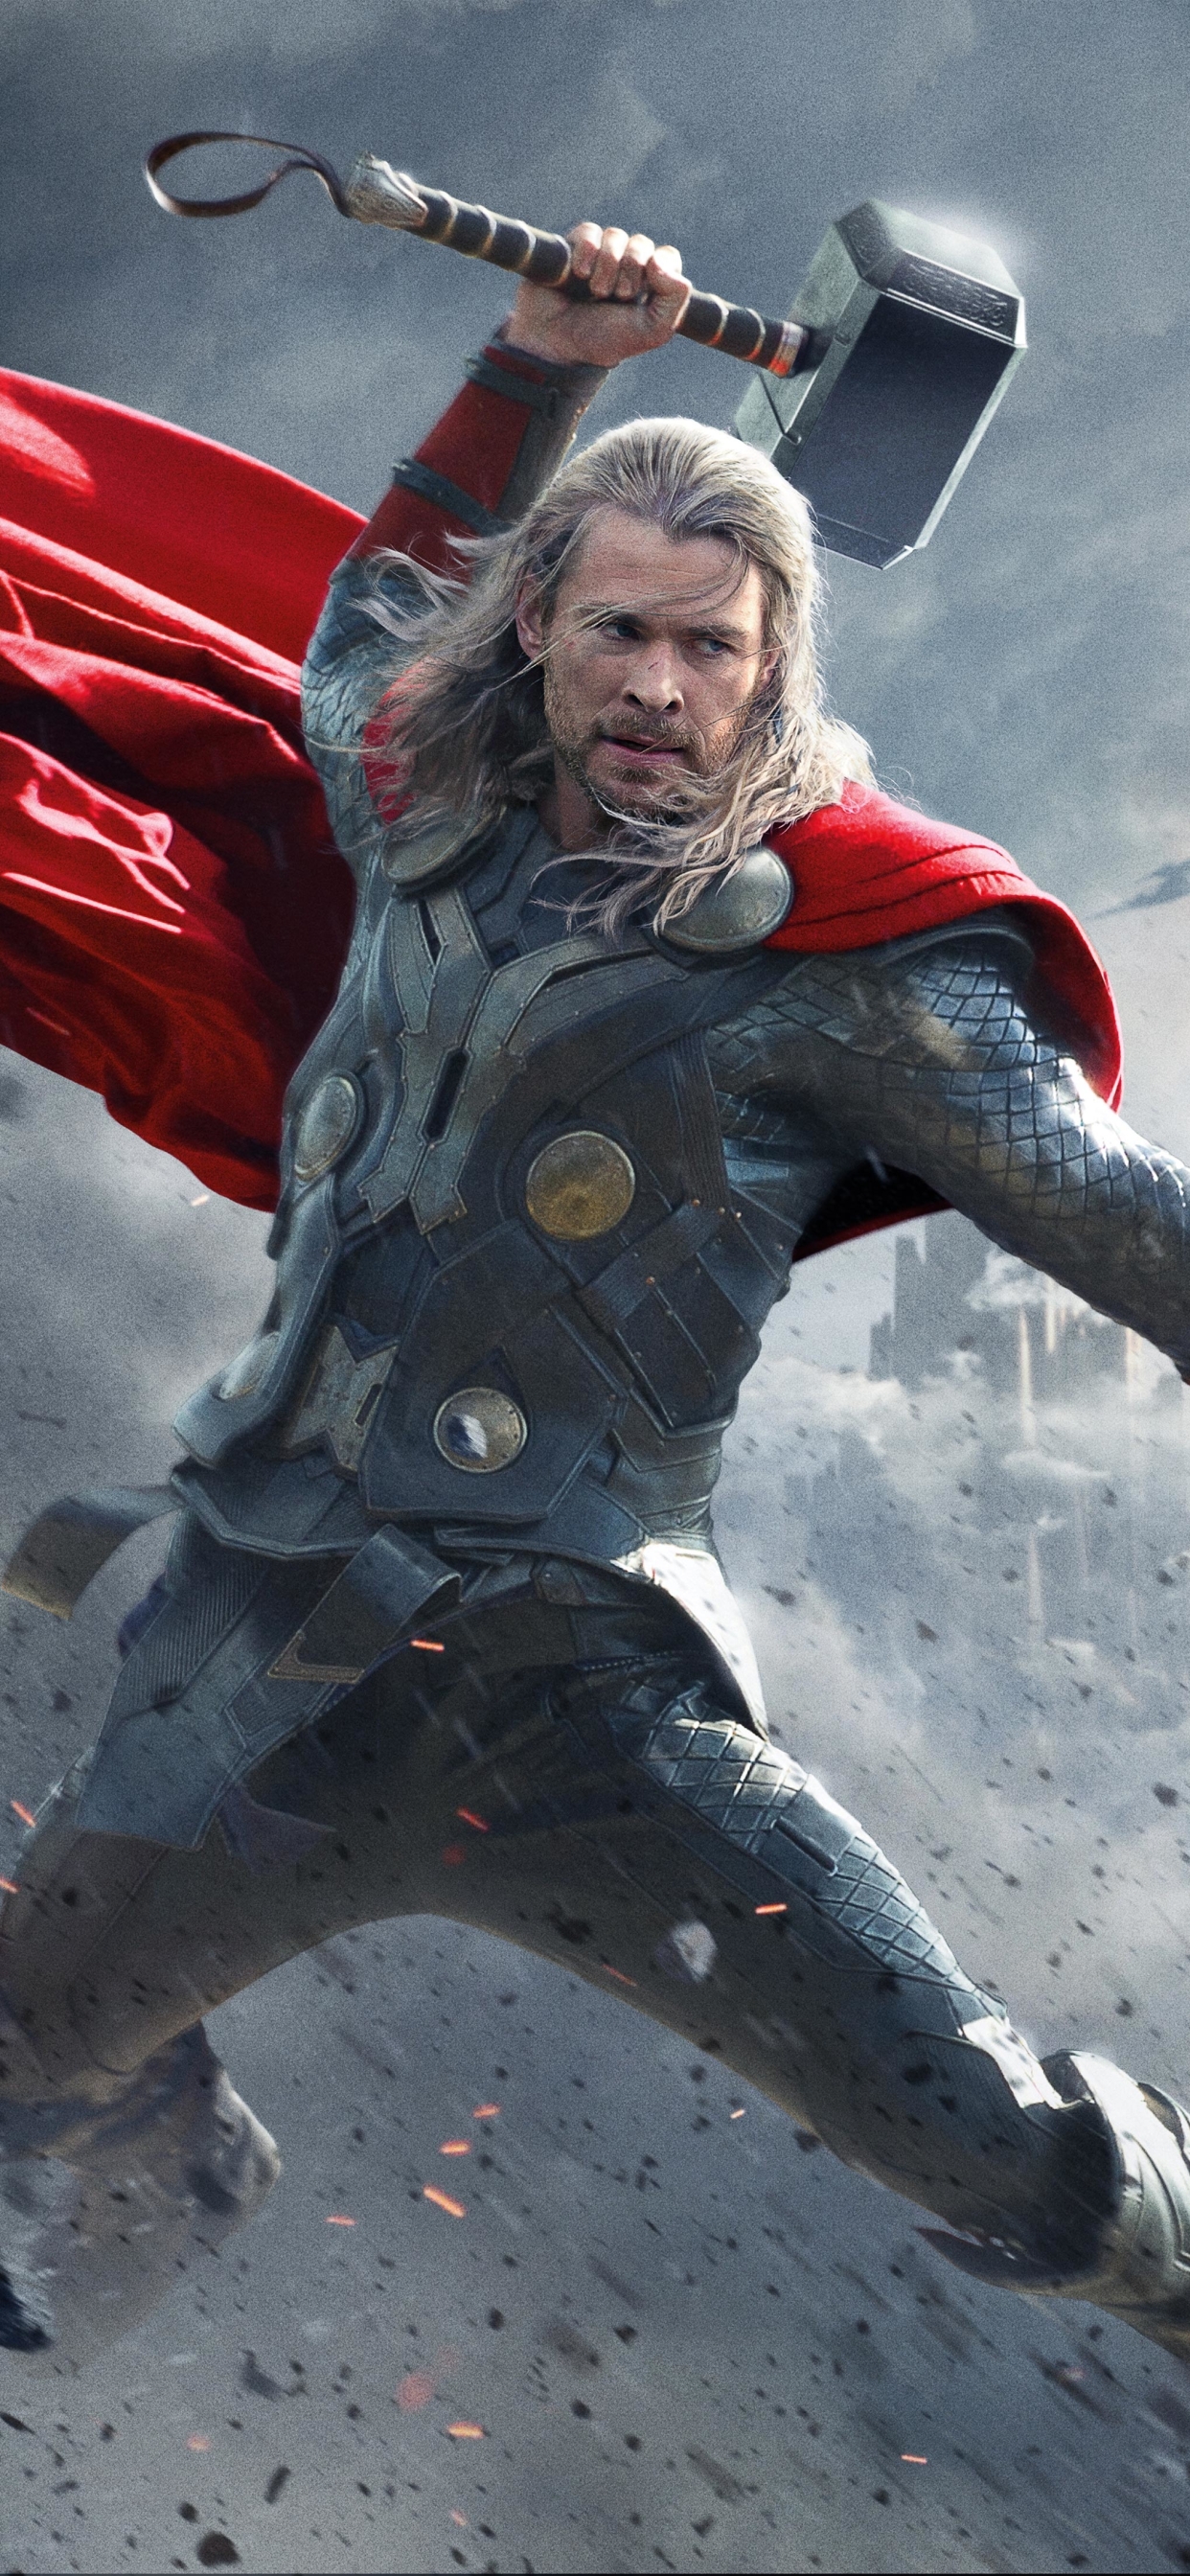 thor 2 5.1 movies for download in tamil